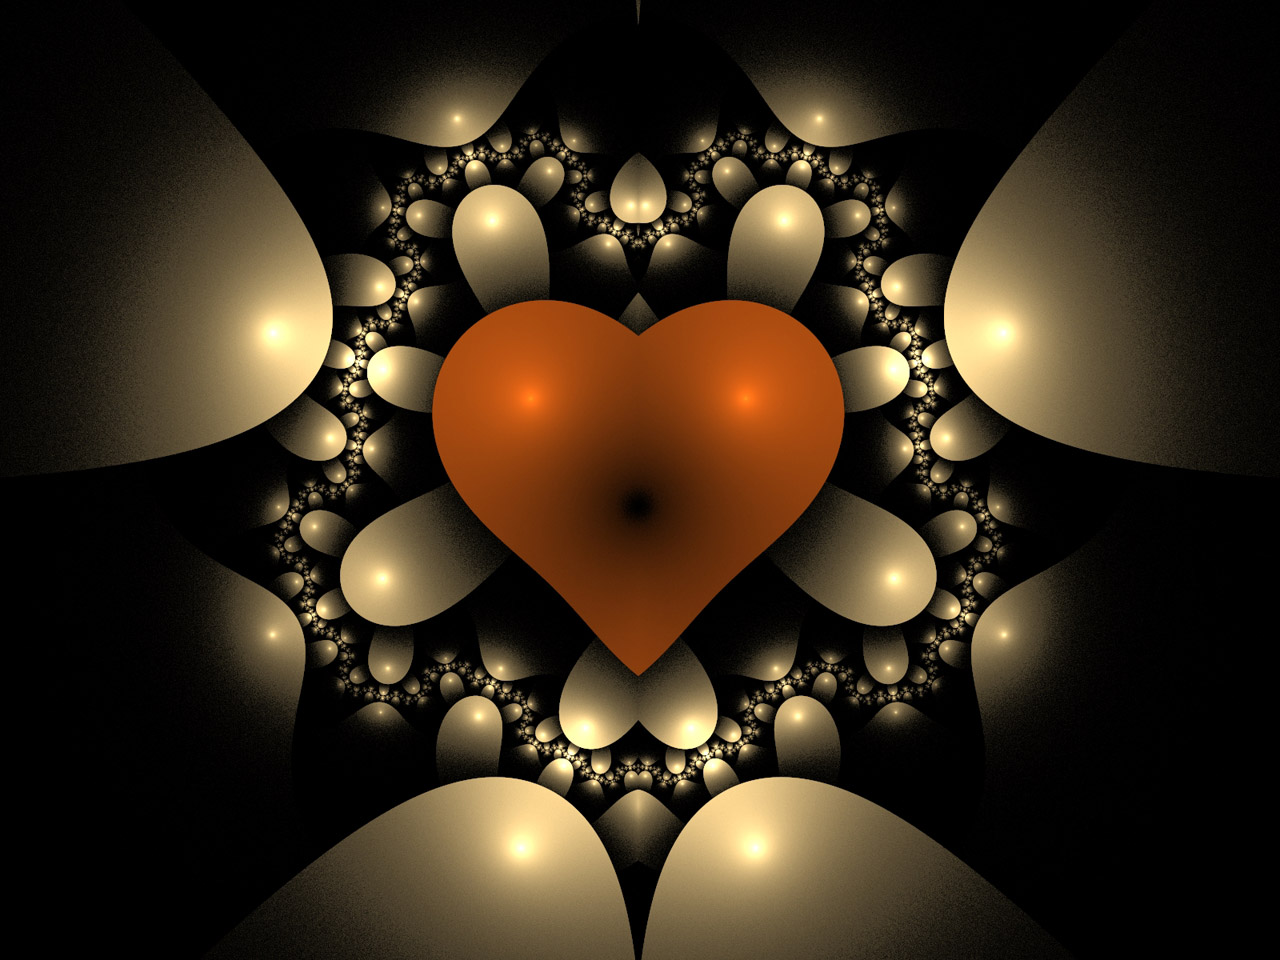 Fractal of a red heart surrounded by beige balls